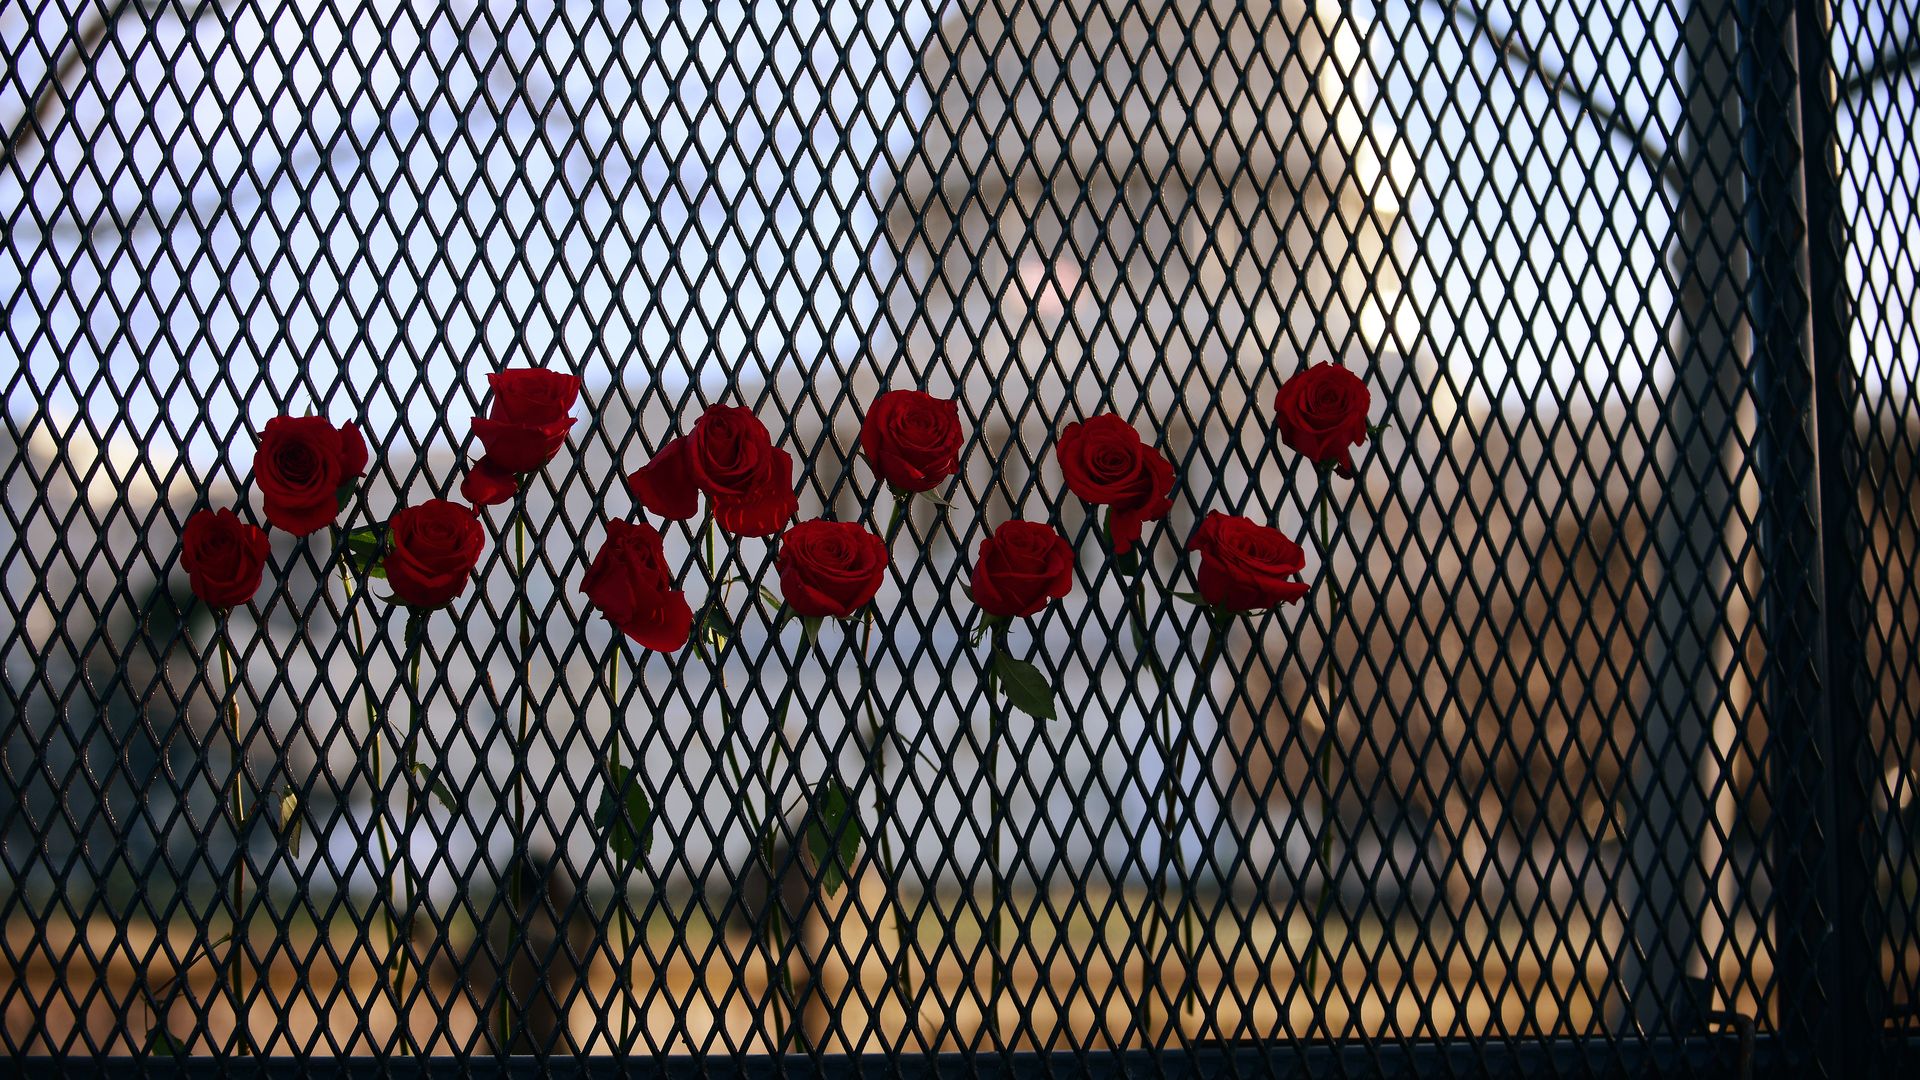 Roses are seen stuck in the security fencing installed around the U.S. Capitol after last week's assault.